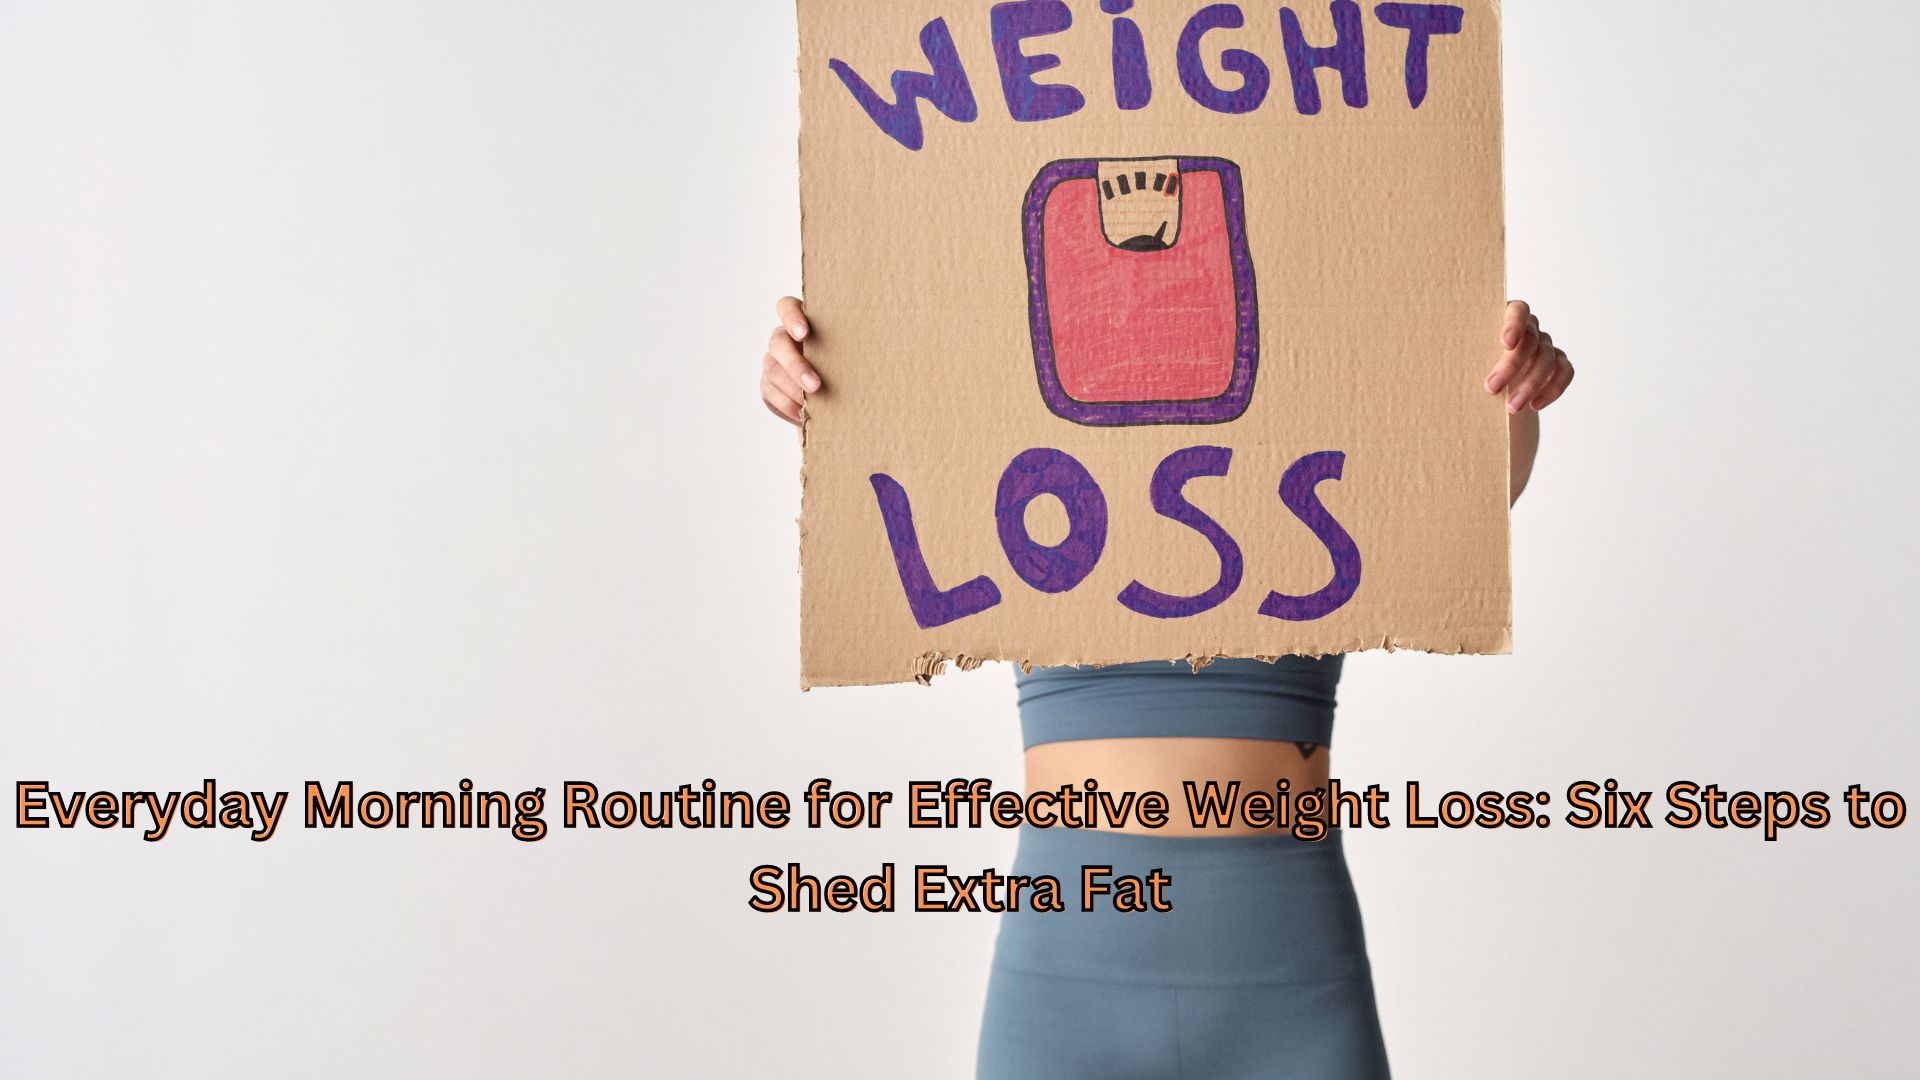 Everyday Morning Routine for Effective Weight Loss: Six Steps to Shed Extra Fat